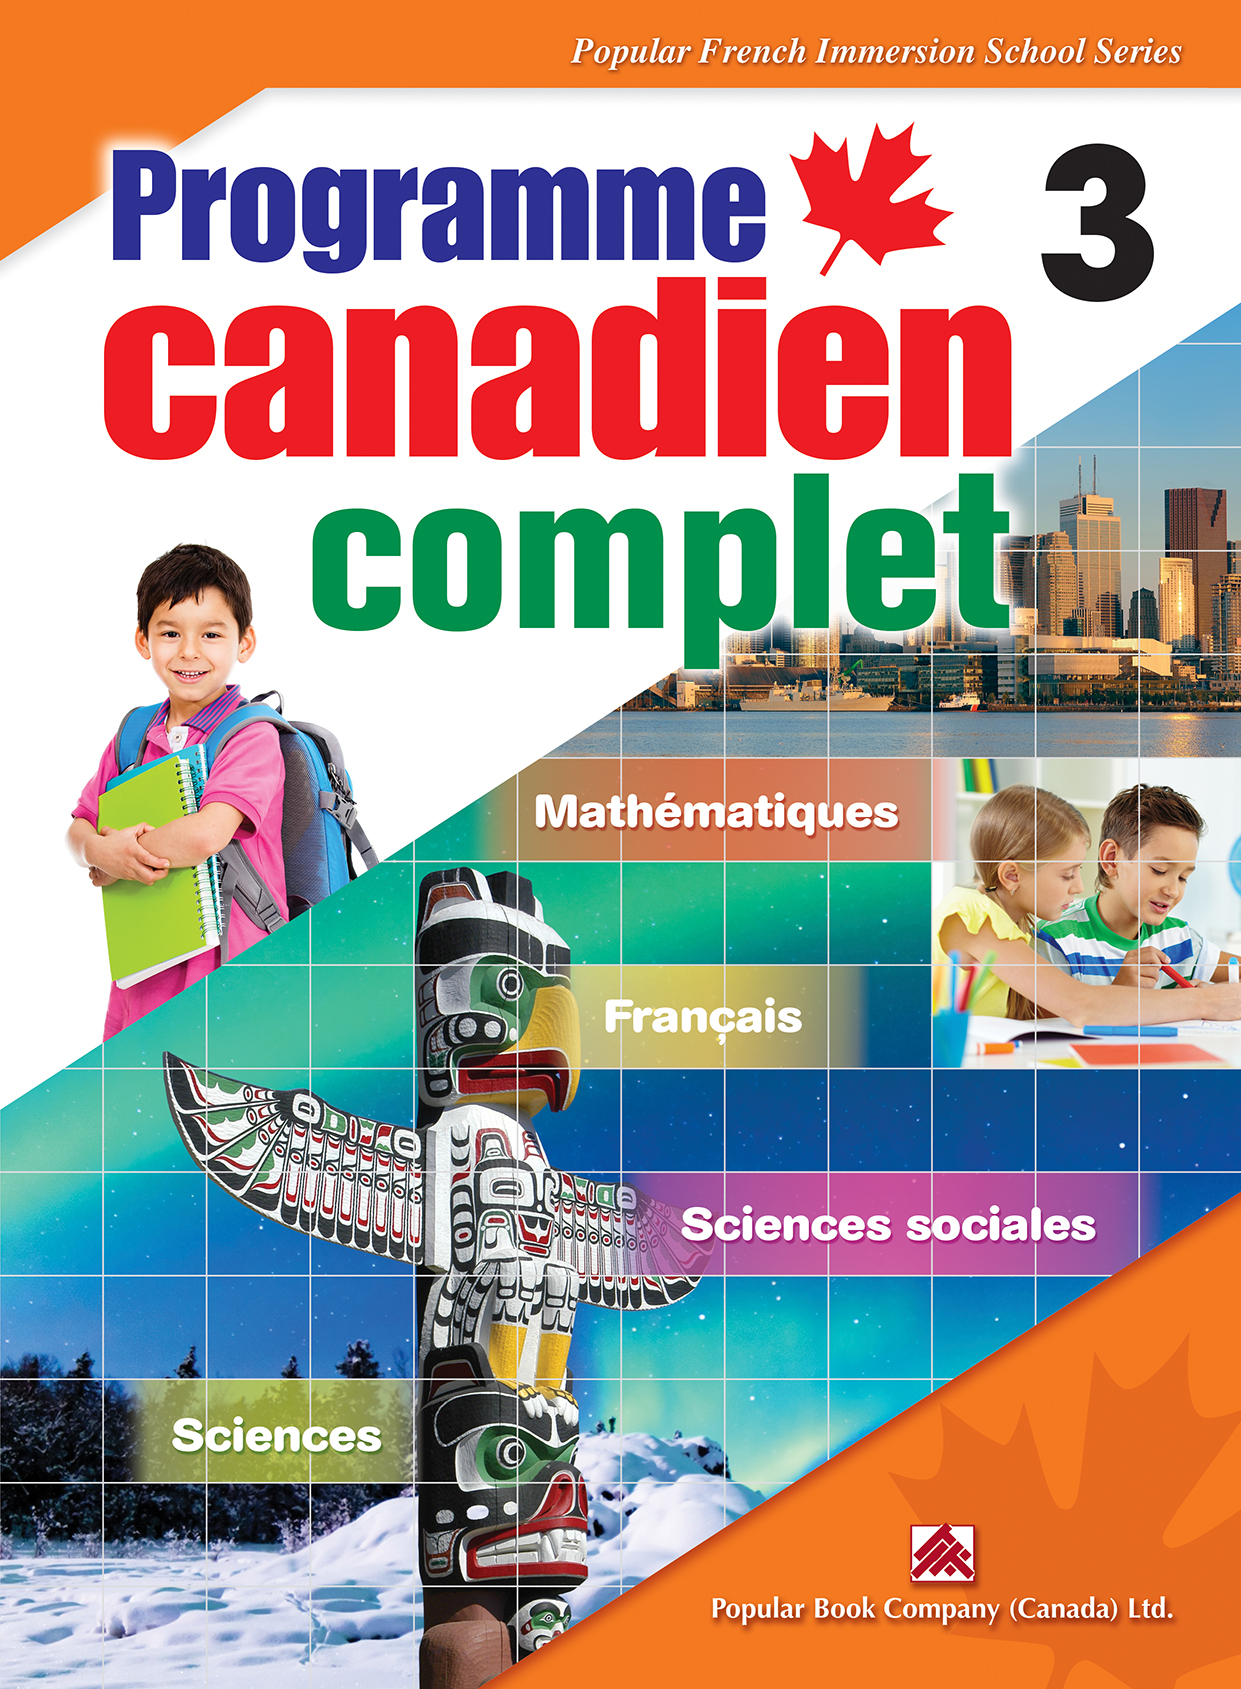 Programme Canadien Complet G3 1